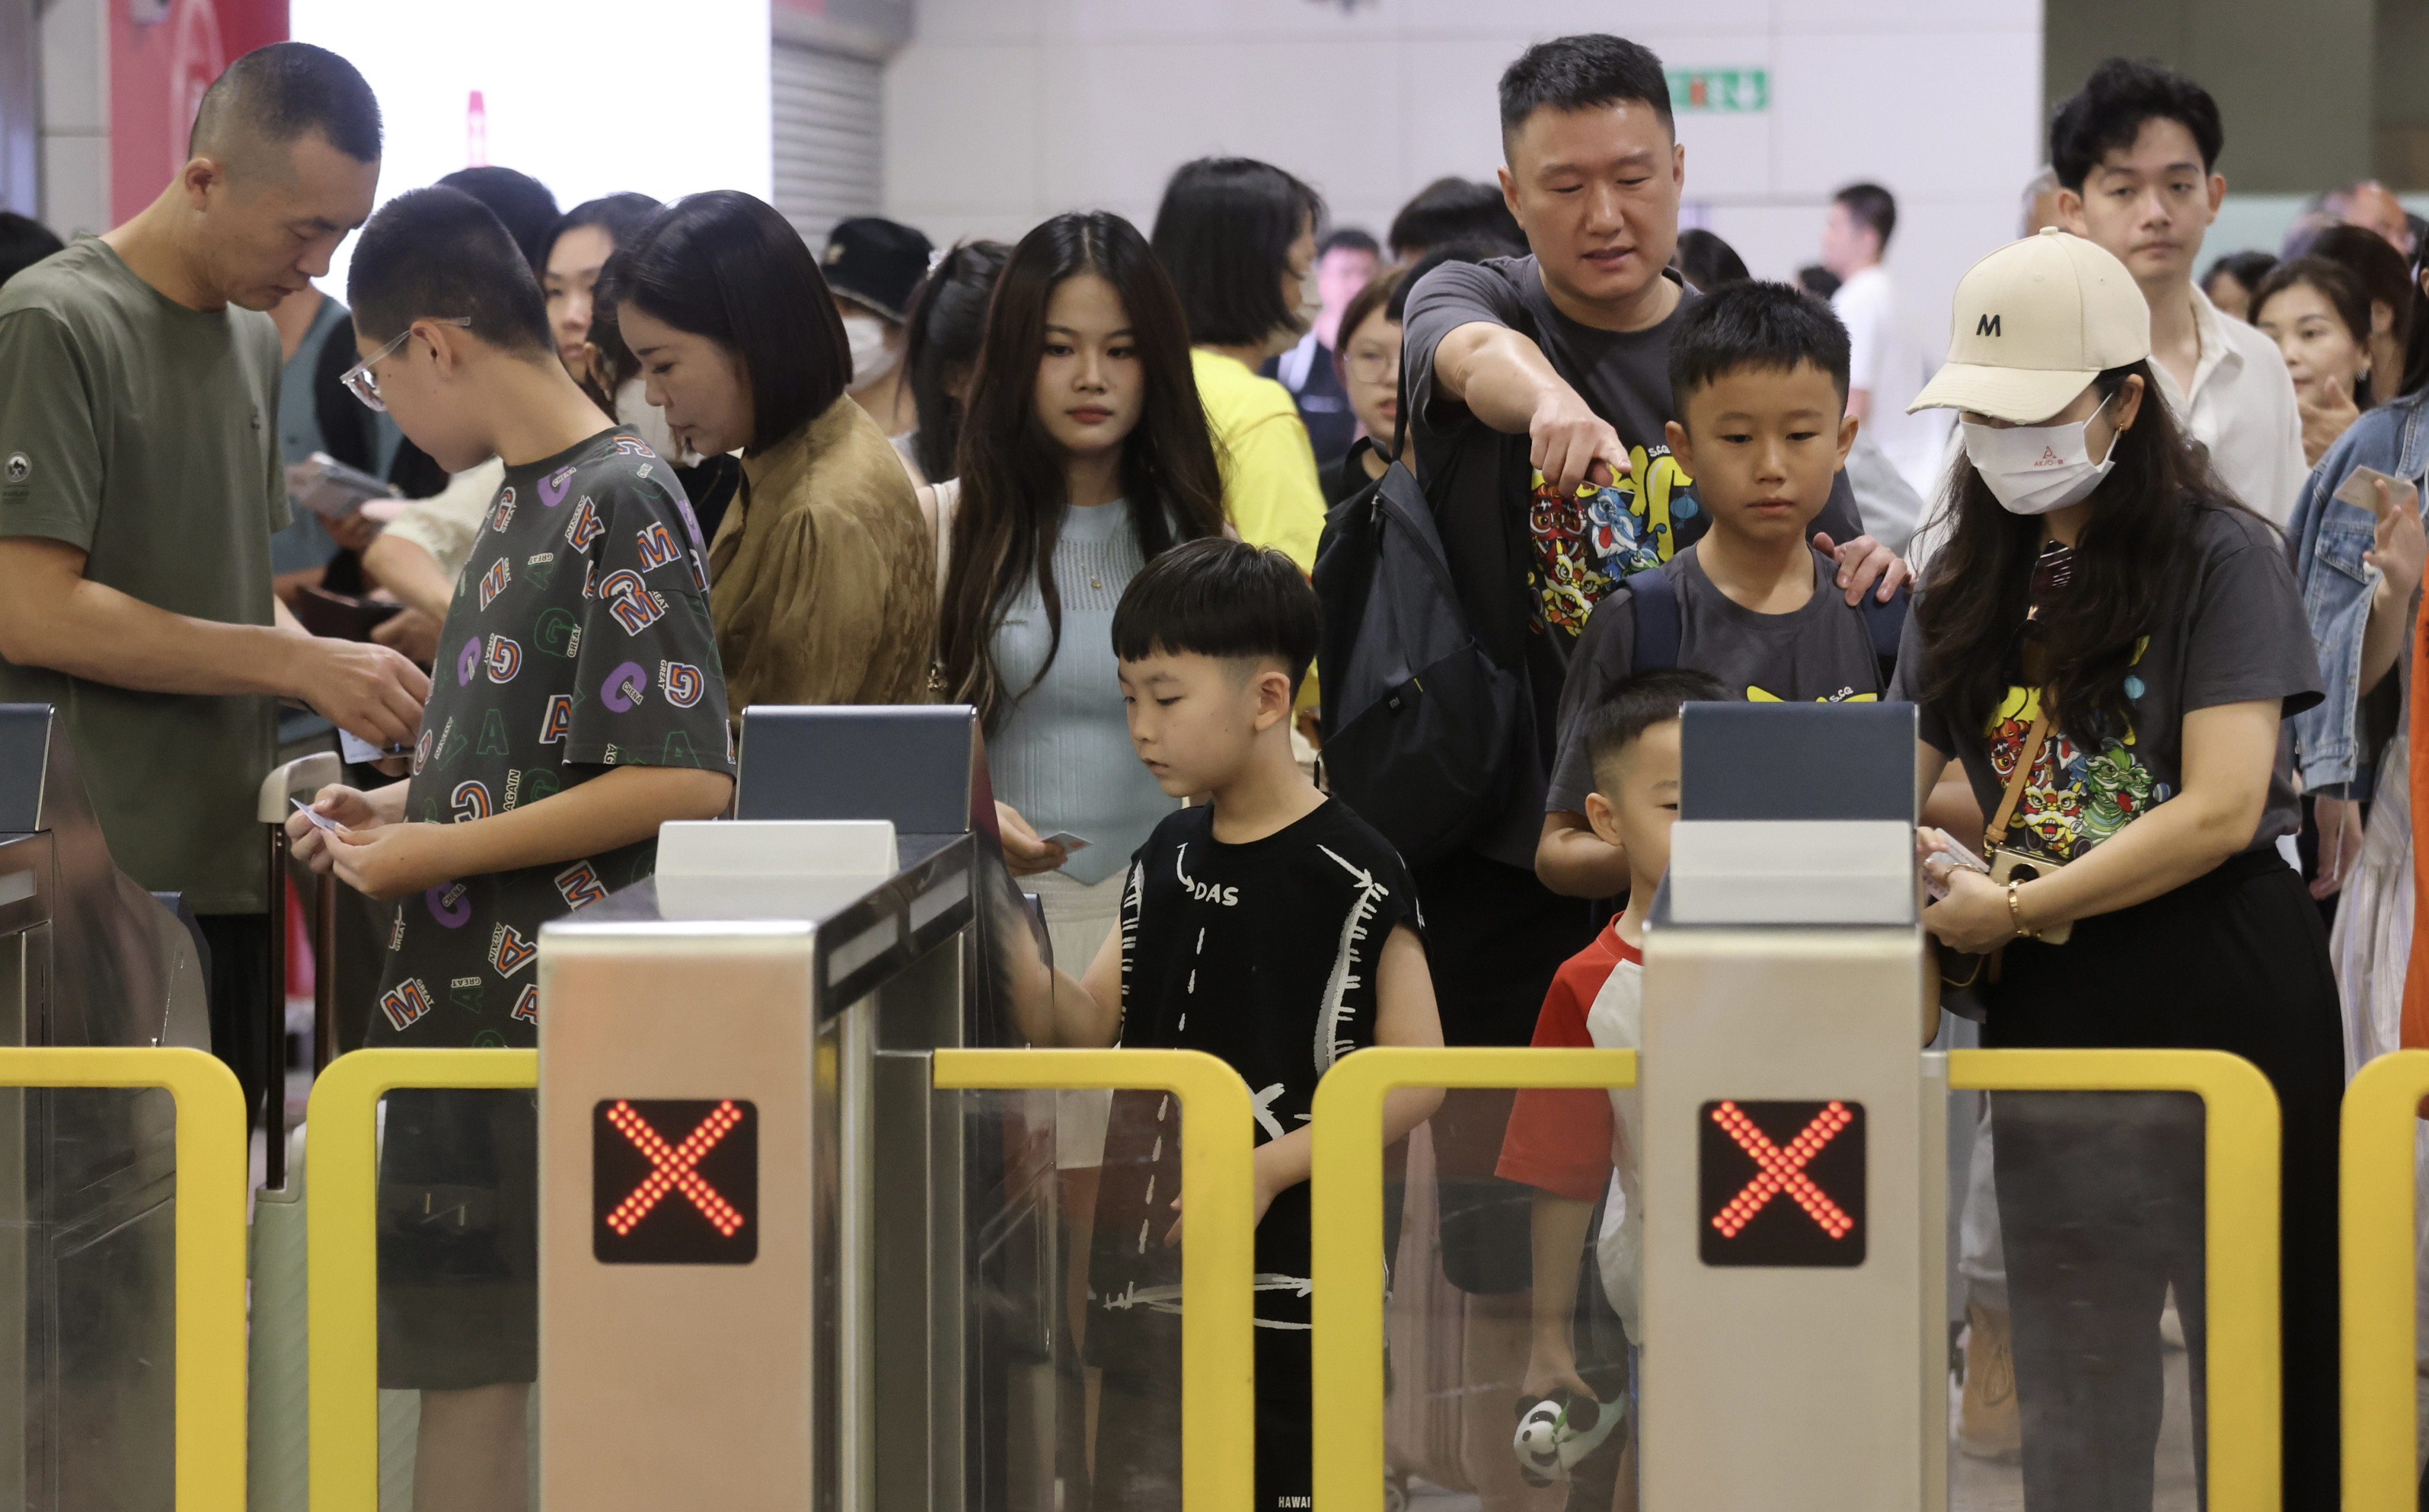 Travellers pass through gates at Hong Kong’s West Kowloon station. The high-speed rail link currently connects the city to 73 mainland destinations. Photo: Jonathan Wong